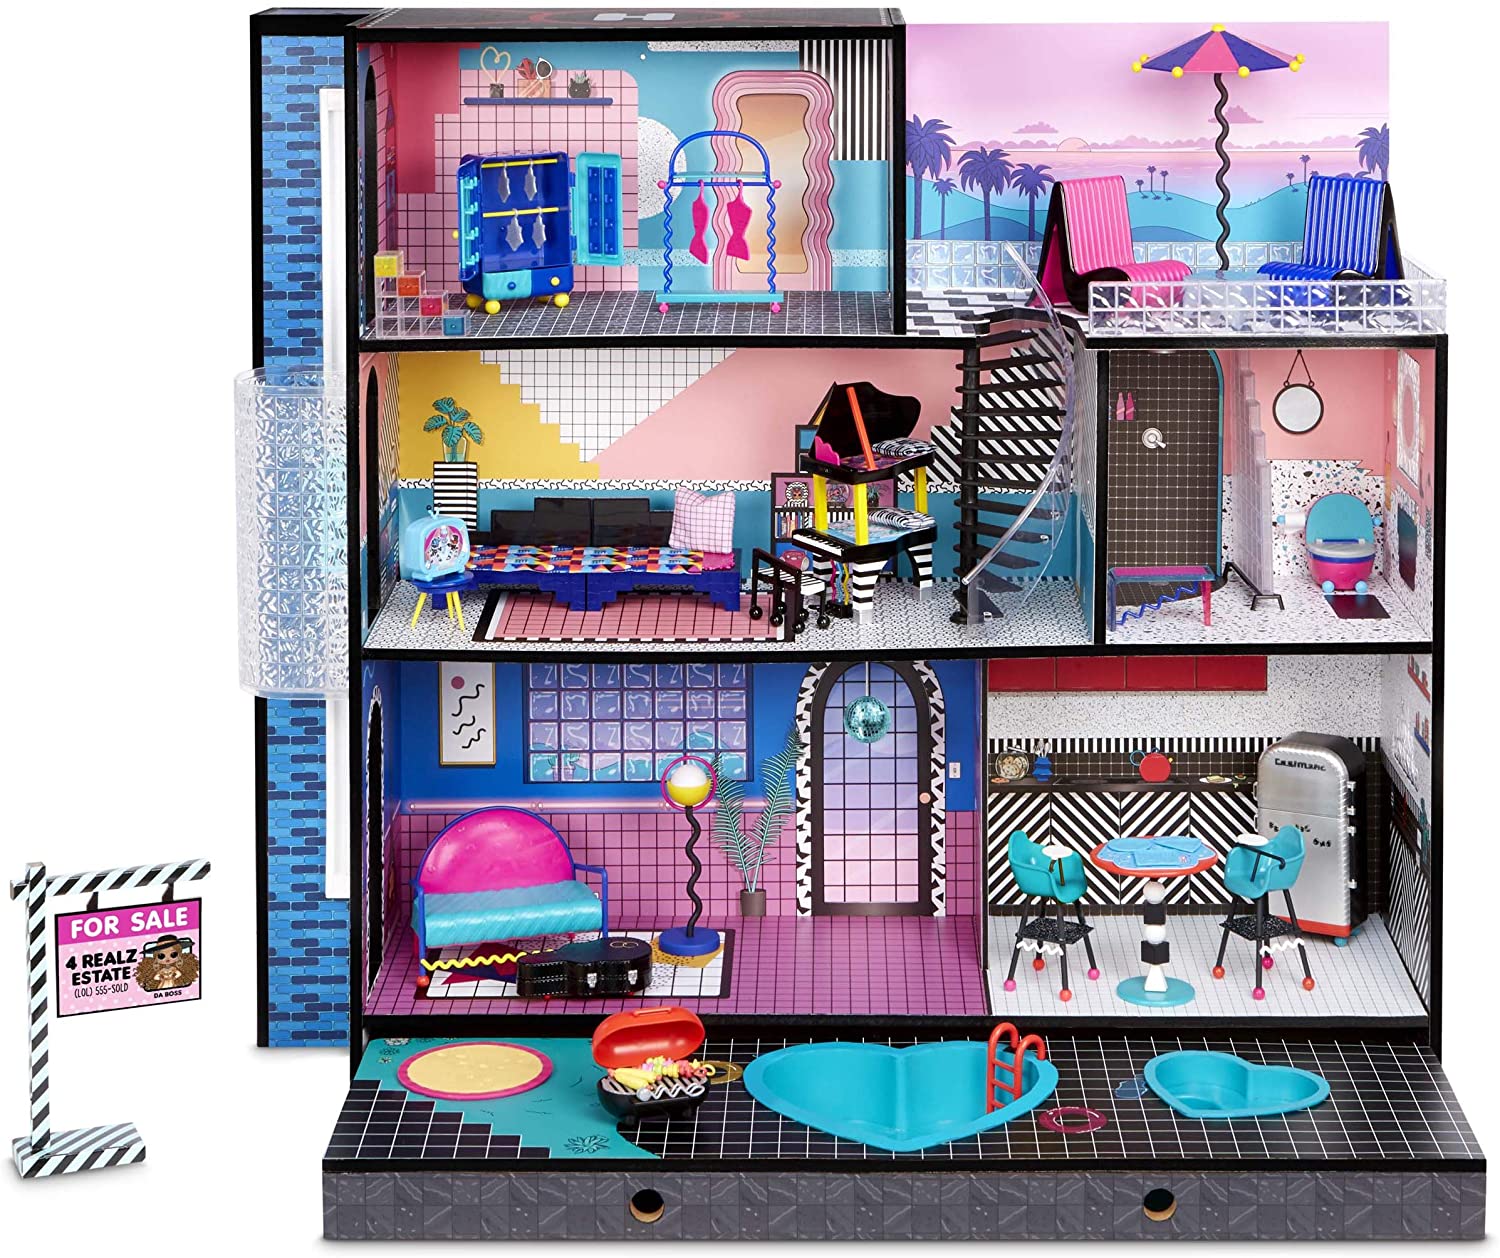 LOL Surprise OMG House 2020 - New Real Wood doll House - YouLoveIt.com